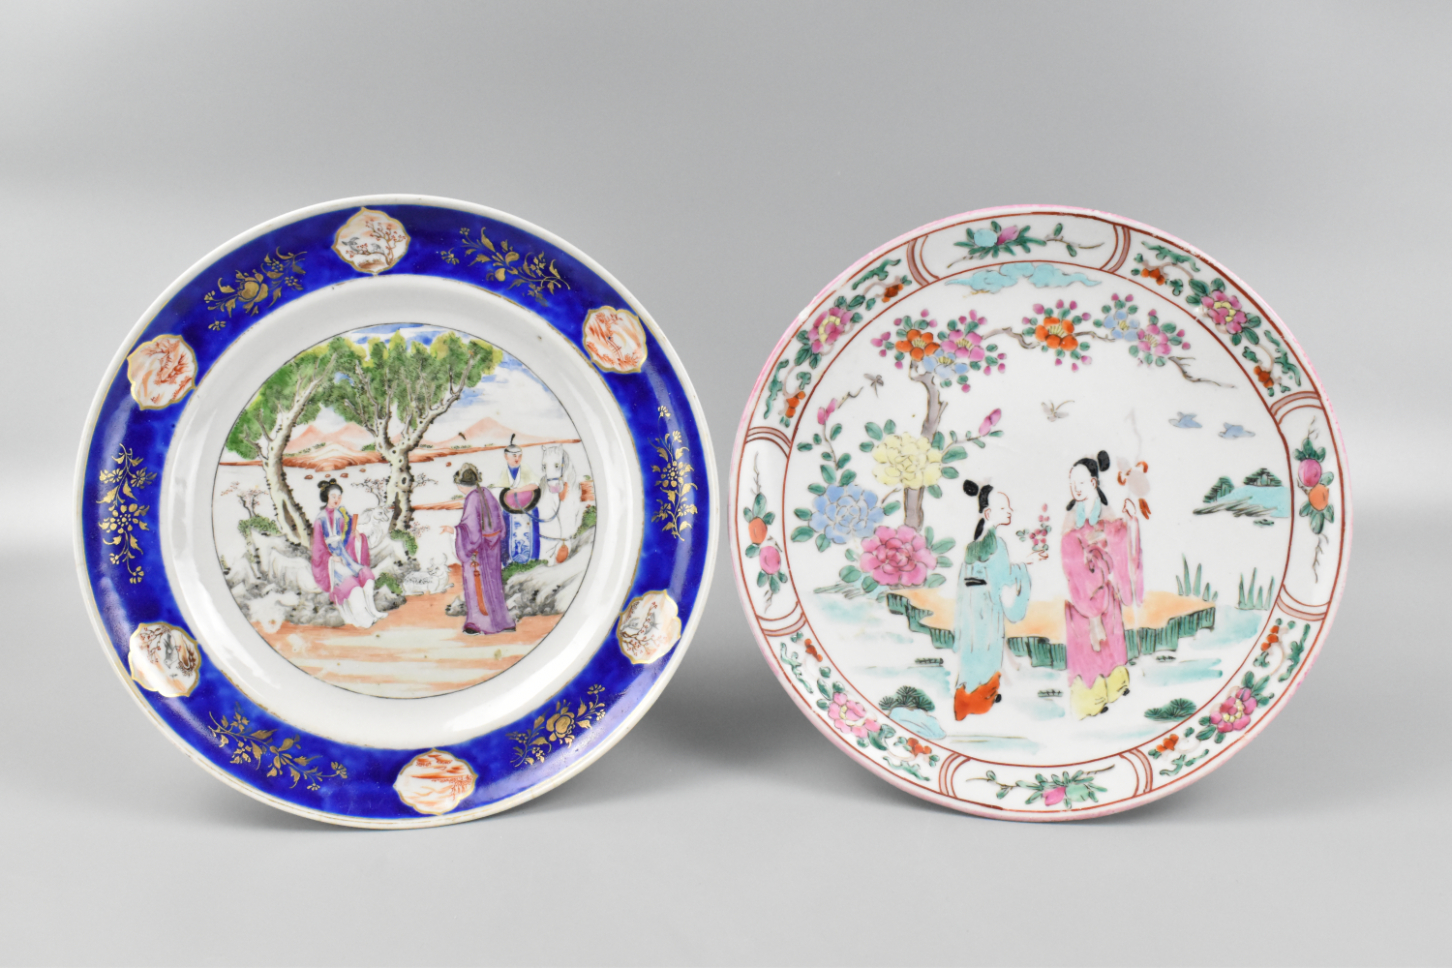 2 CHINESE EXPORT FAMILLE ROSE PLATES 19 20TH 339fa2